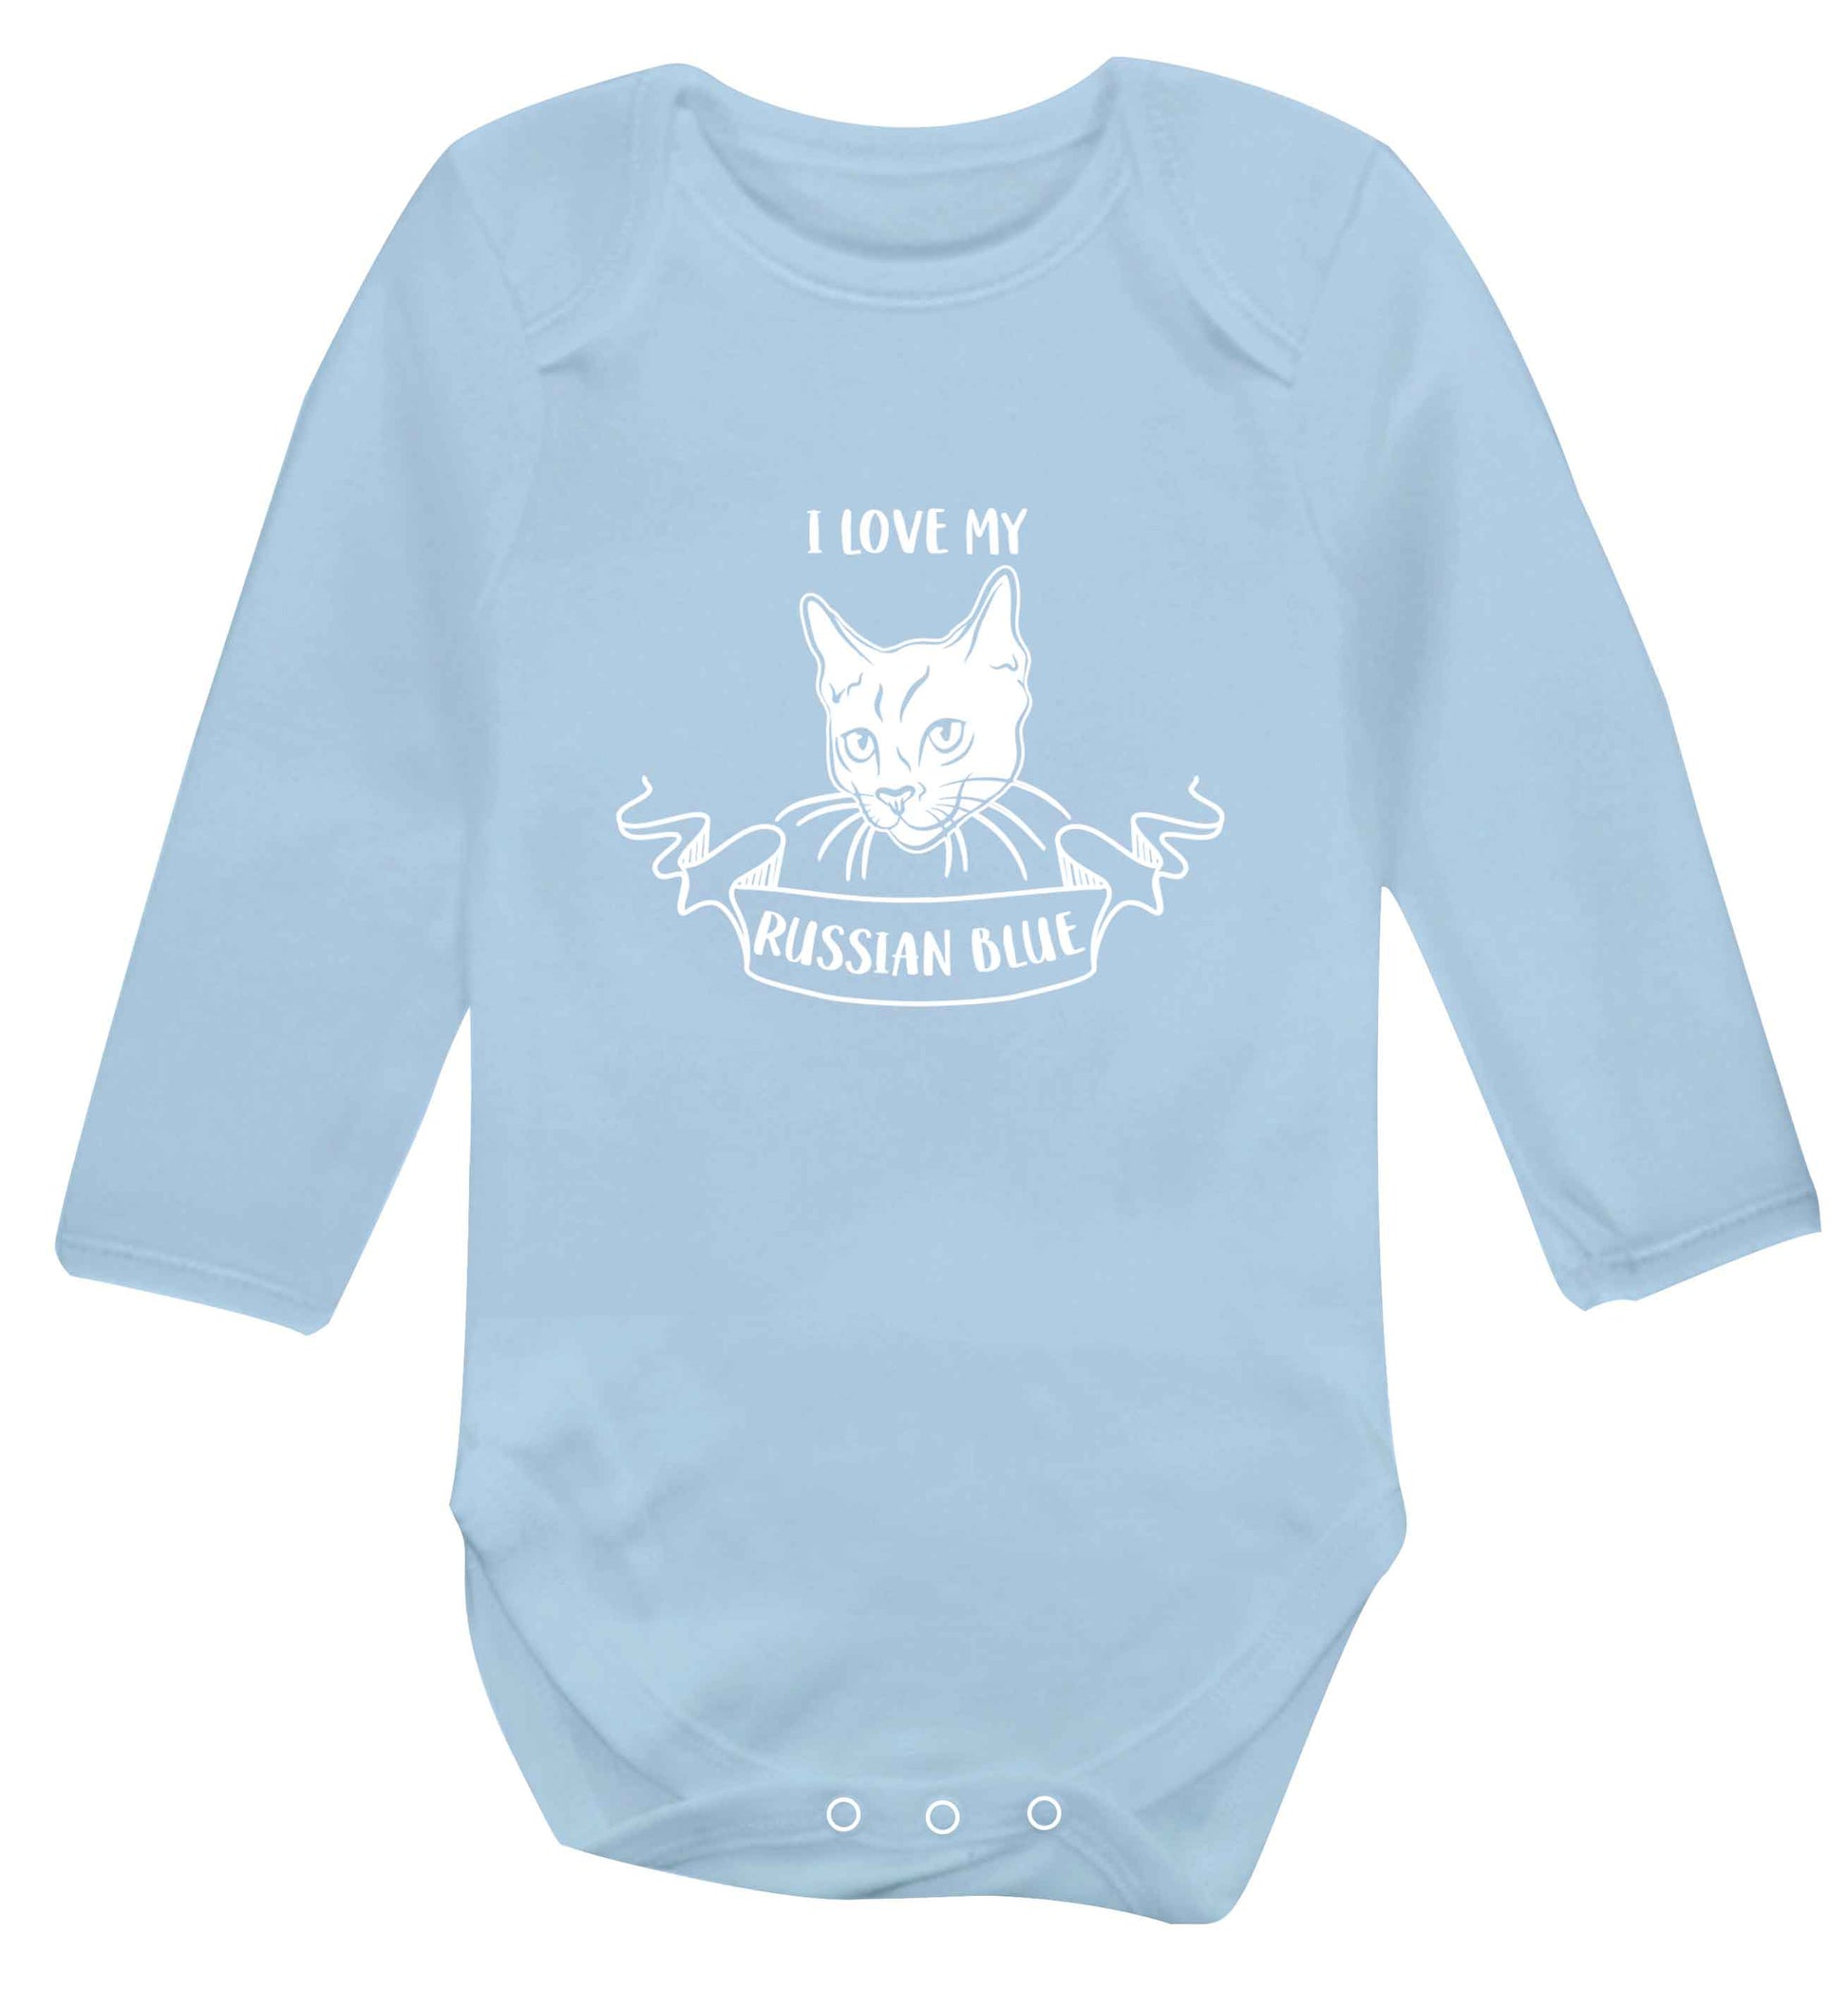 I love my russian blue baby vest long sleeved pale blue 6-12 months